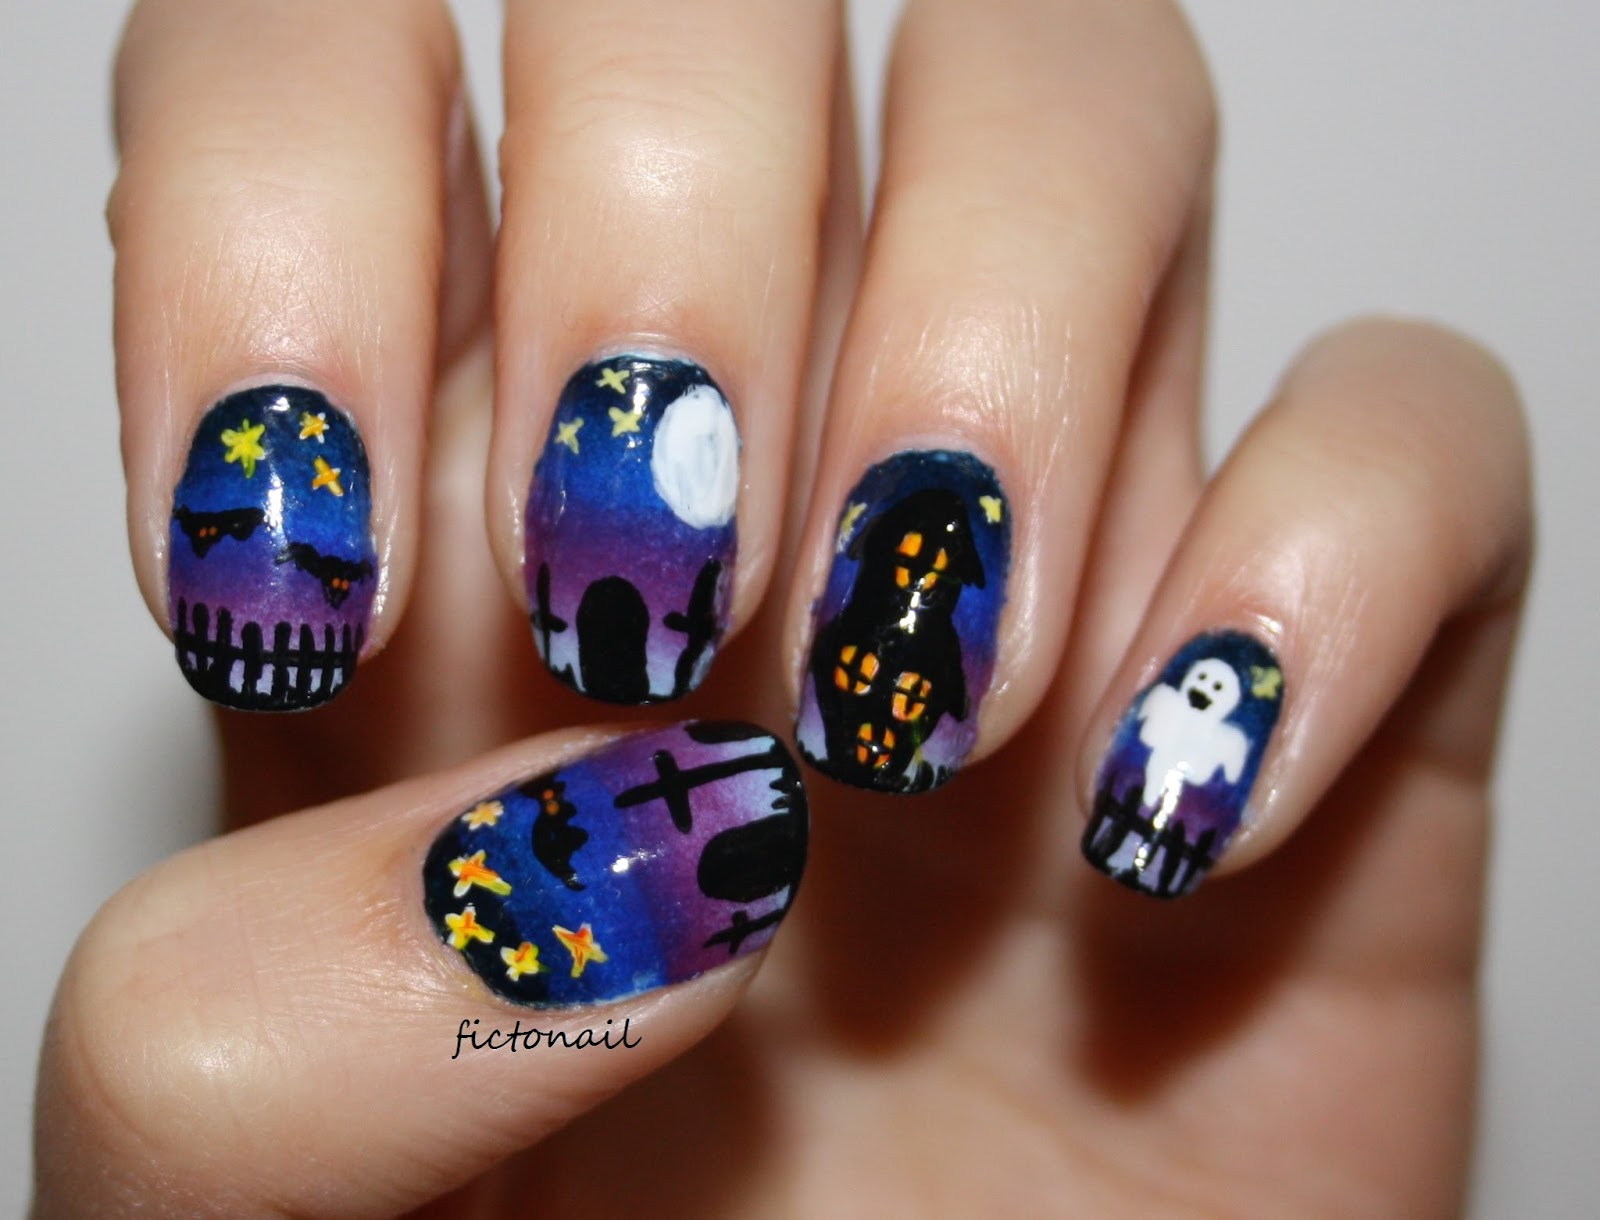 7. "Haunted House Nails" - wide 9